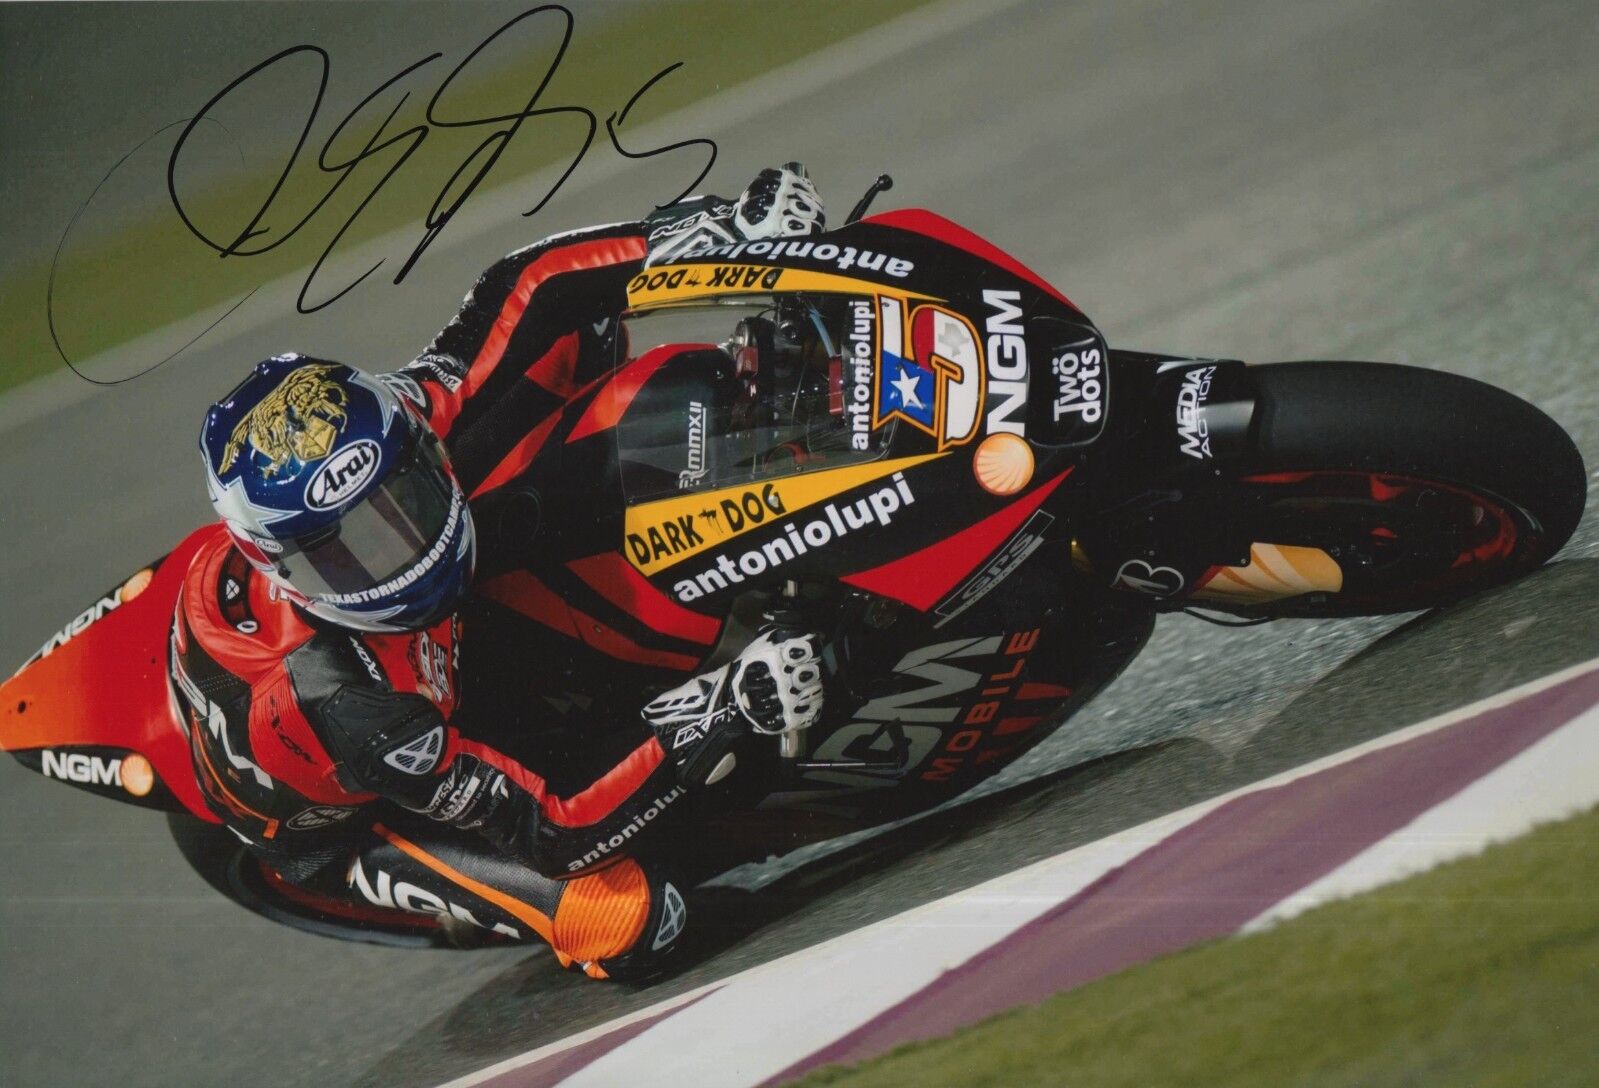 Colin Edwards Hand Signed NGM Mobile Forward Racing 12x8 Photo Poster painting MOTOGP 12.